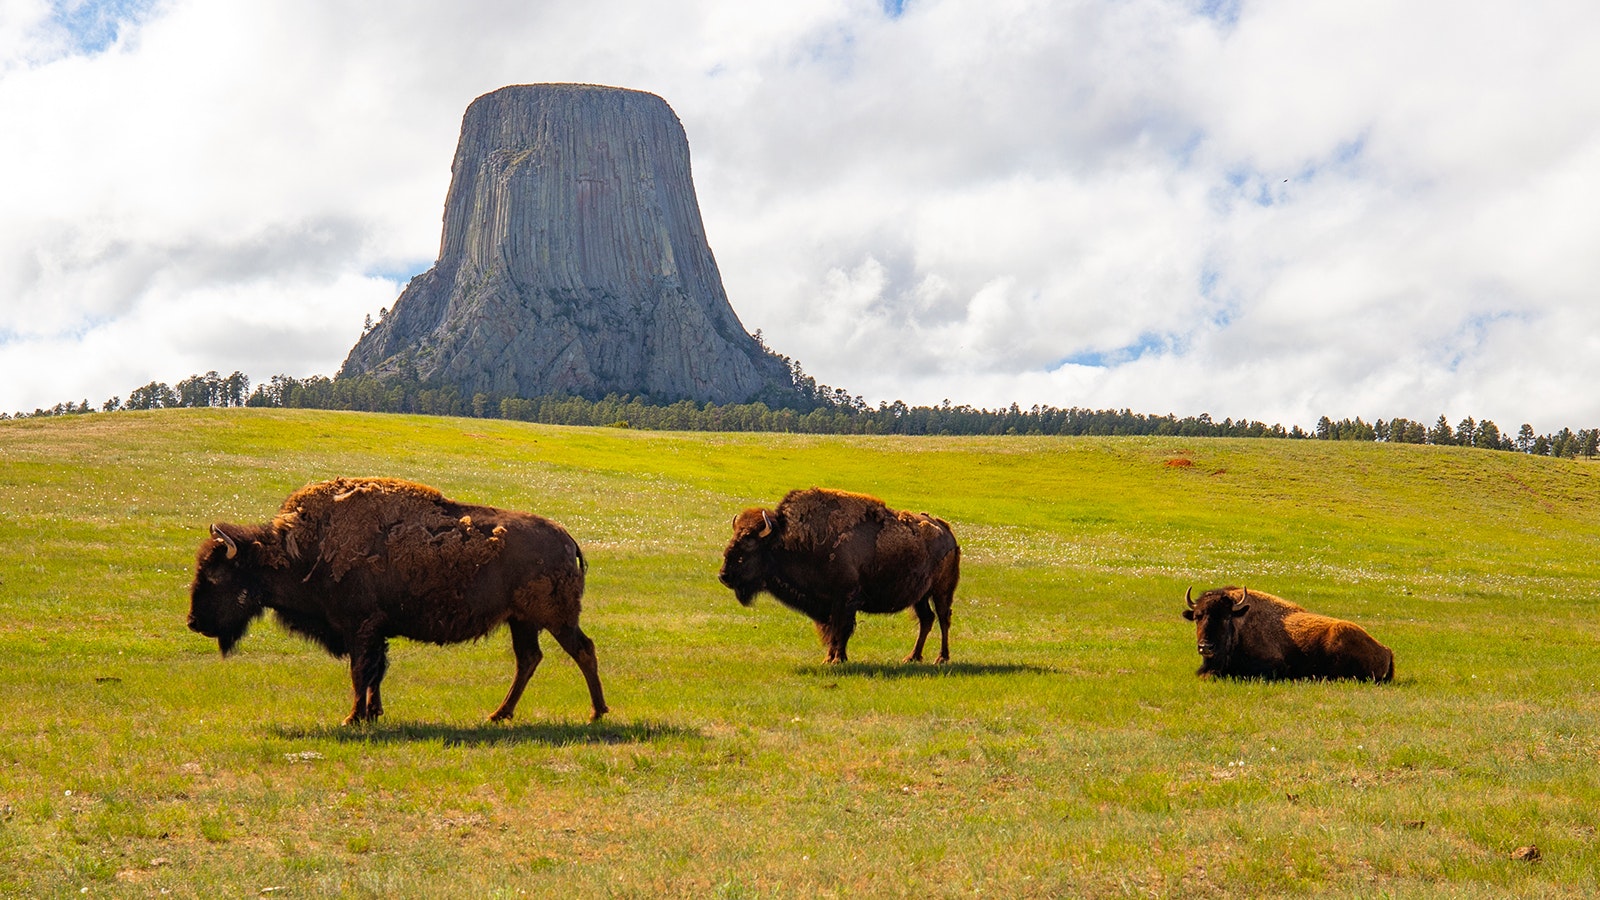 Devils Tower is America's first national monument and arguably the most recognizable Wyoming landmark.